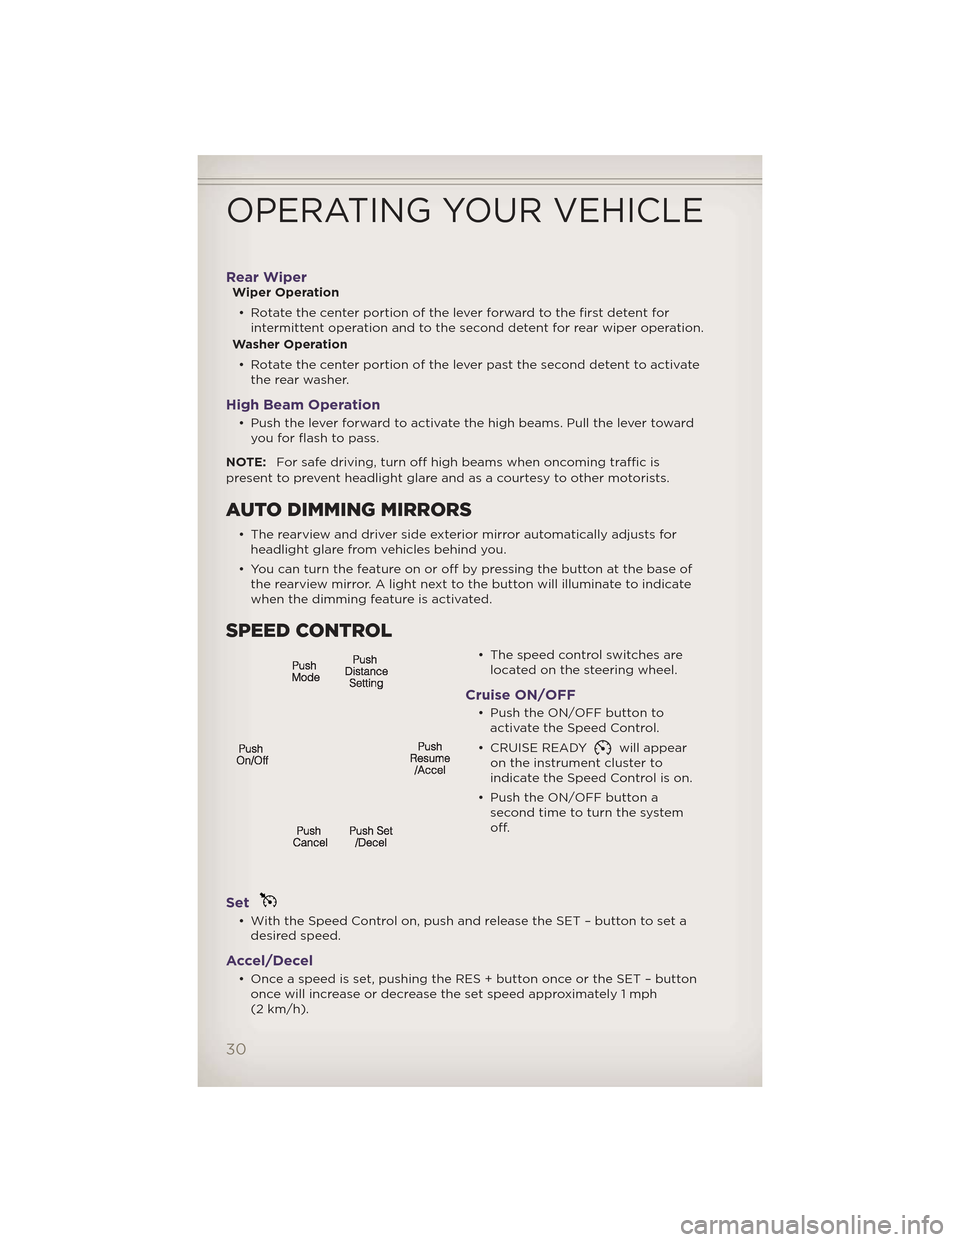 JEEP GRAND CHEROKEE 2012 WK2 / 4.G User Guide Rear WiperWiper Operation• Rotate the center portion of the lever forward to the first detent for intermittent operation and to the second detent for rear wiper operation.
Washer Operation
• Rotat